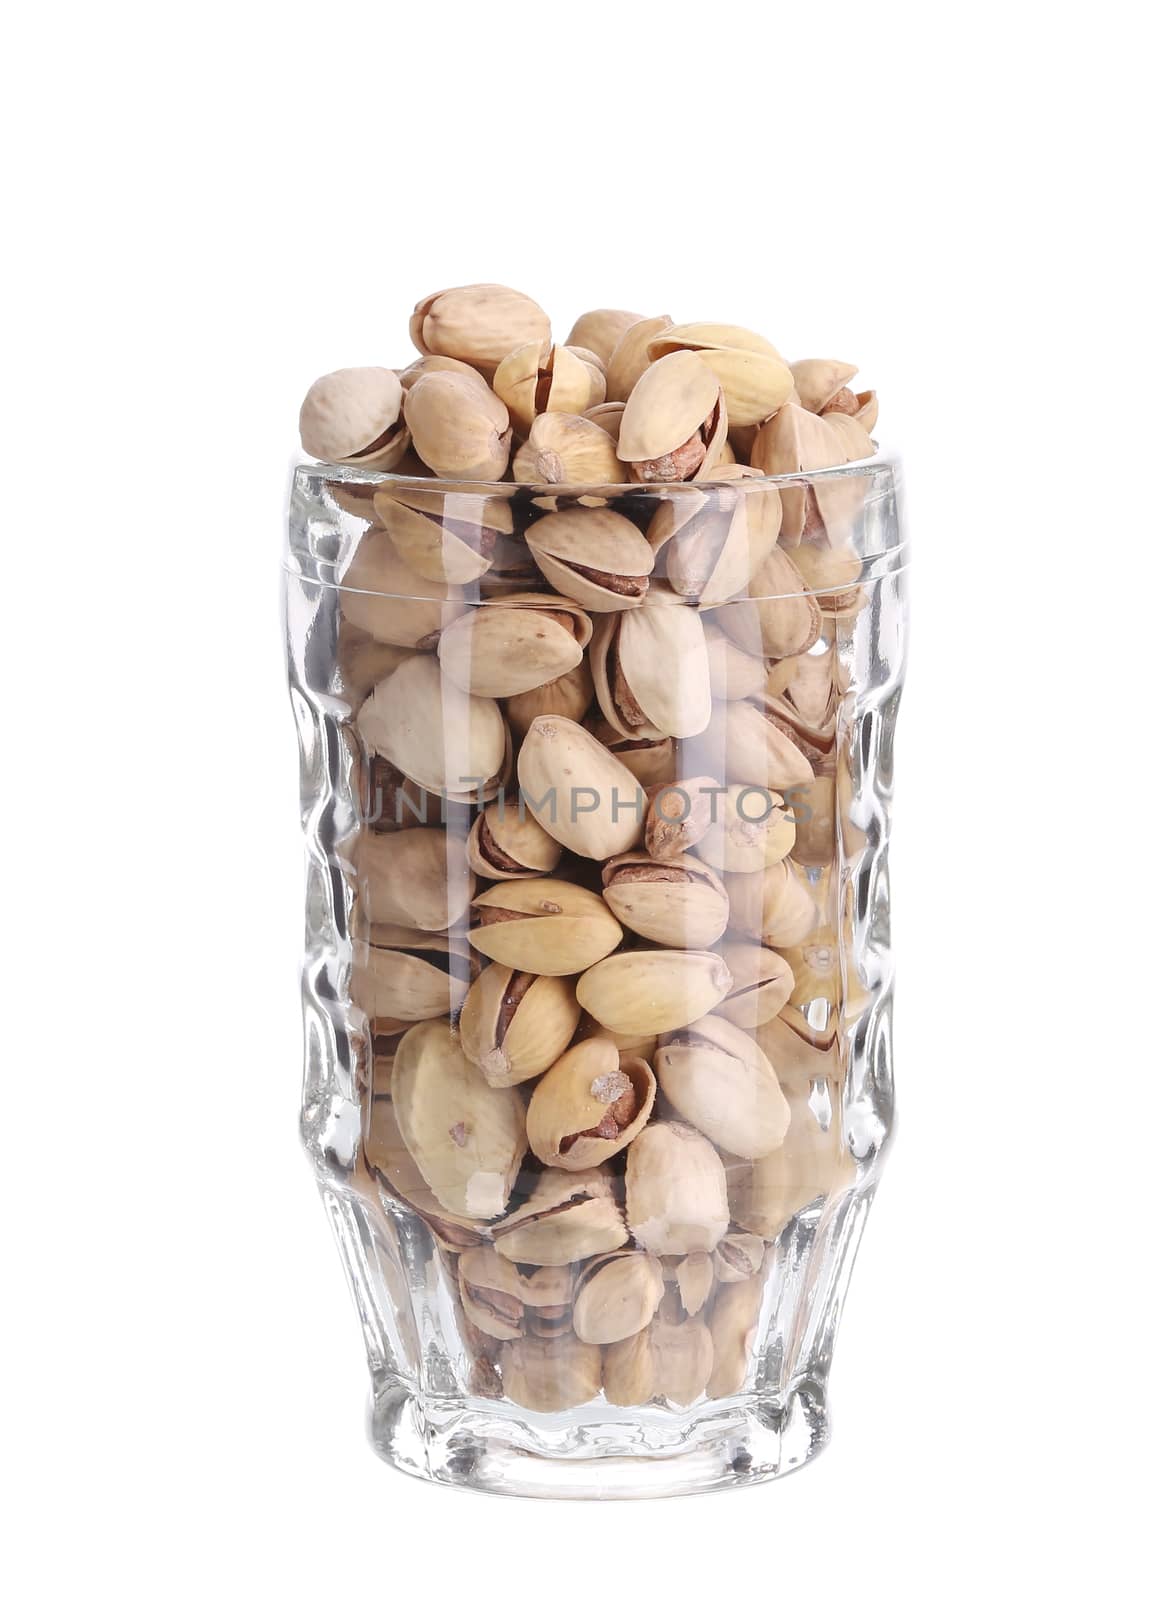 Beer mug full of pistachios. Isolated on a white background.